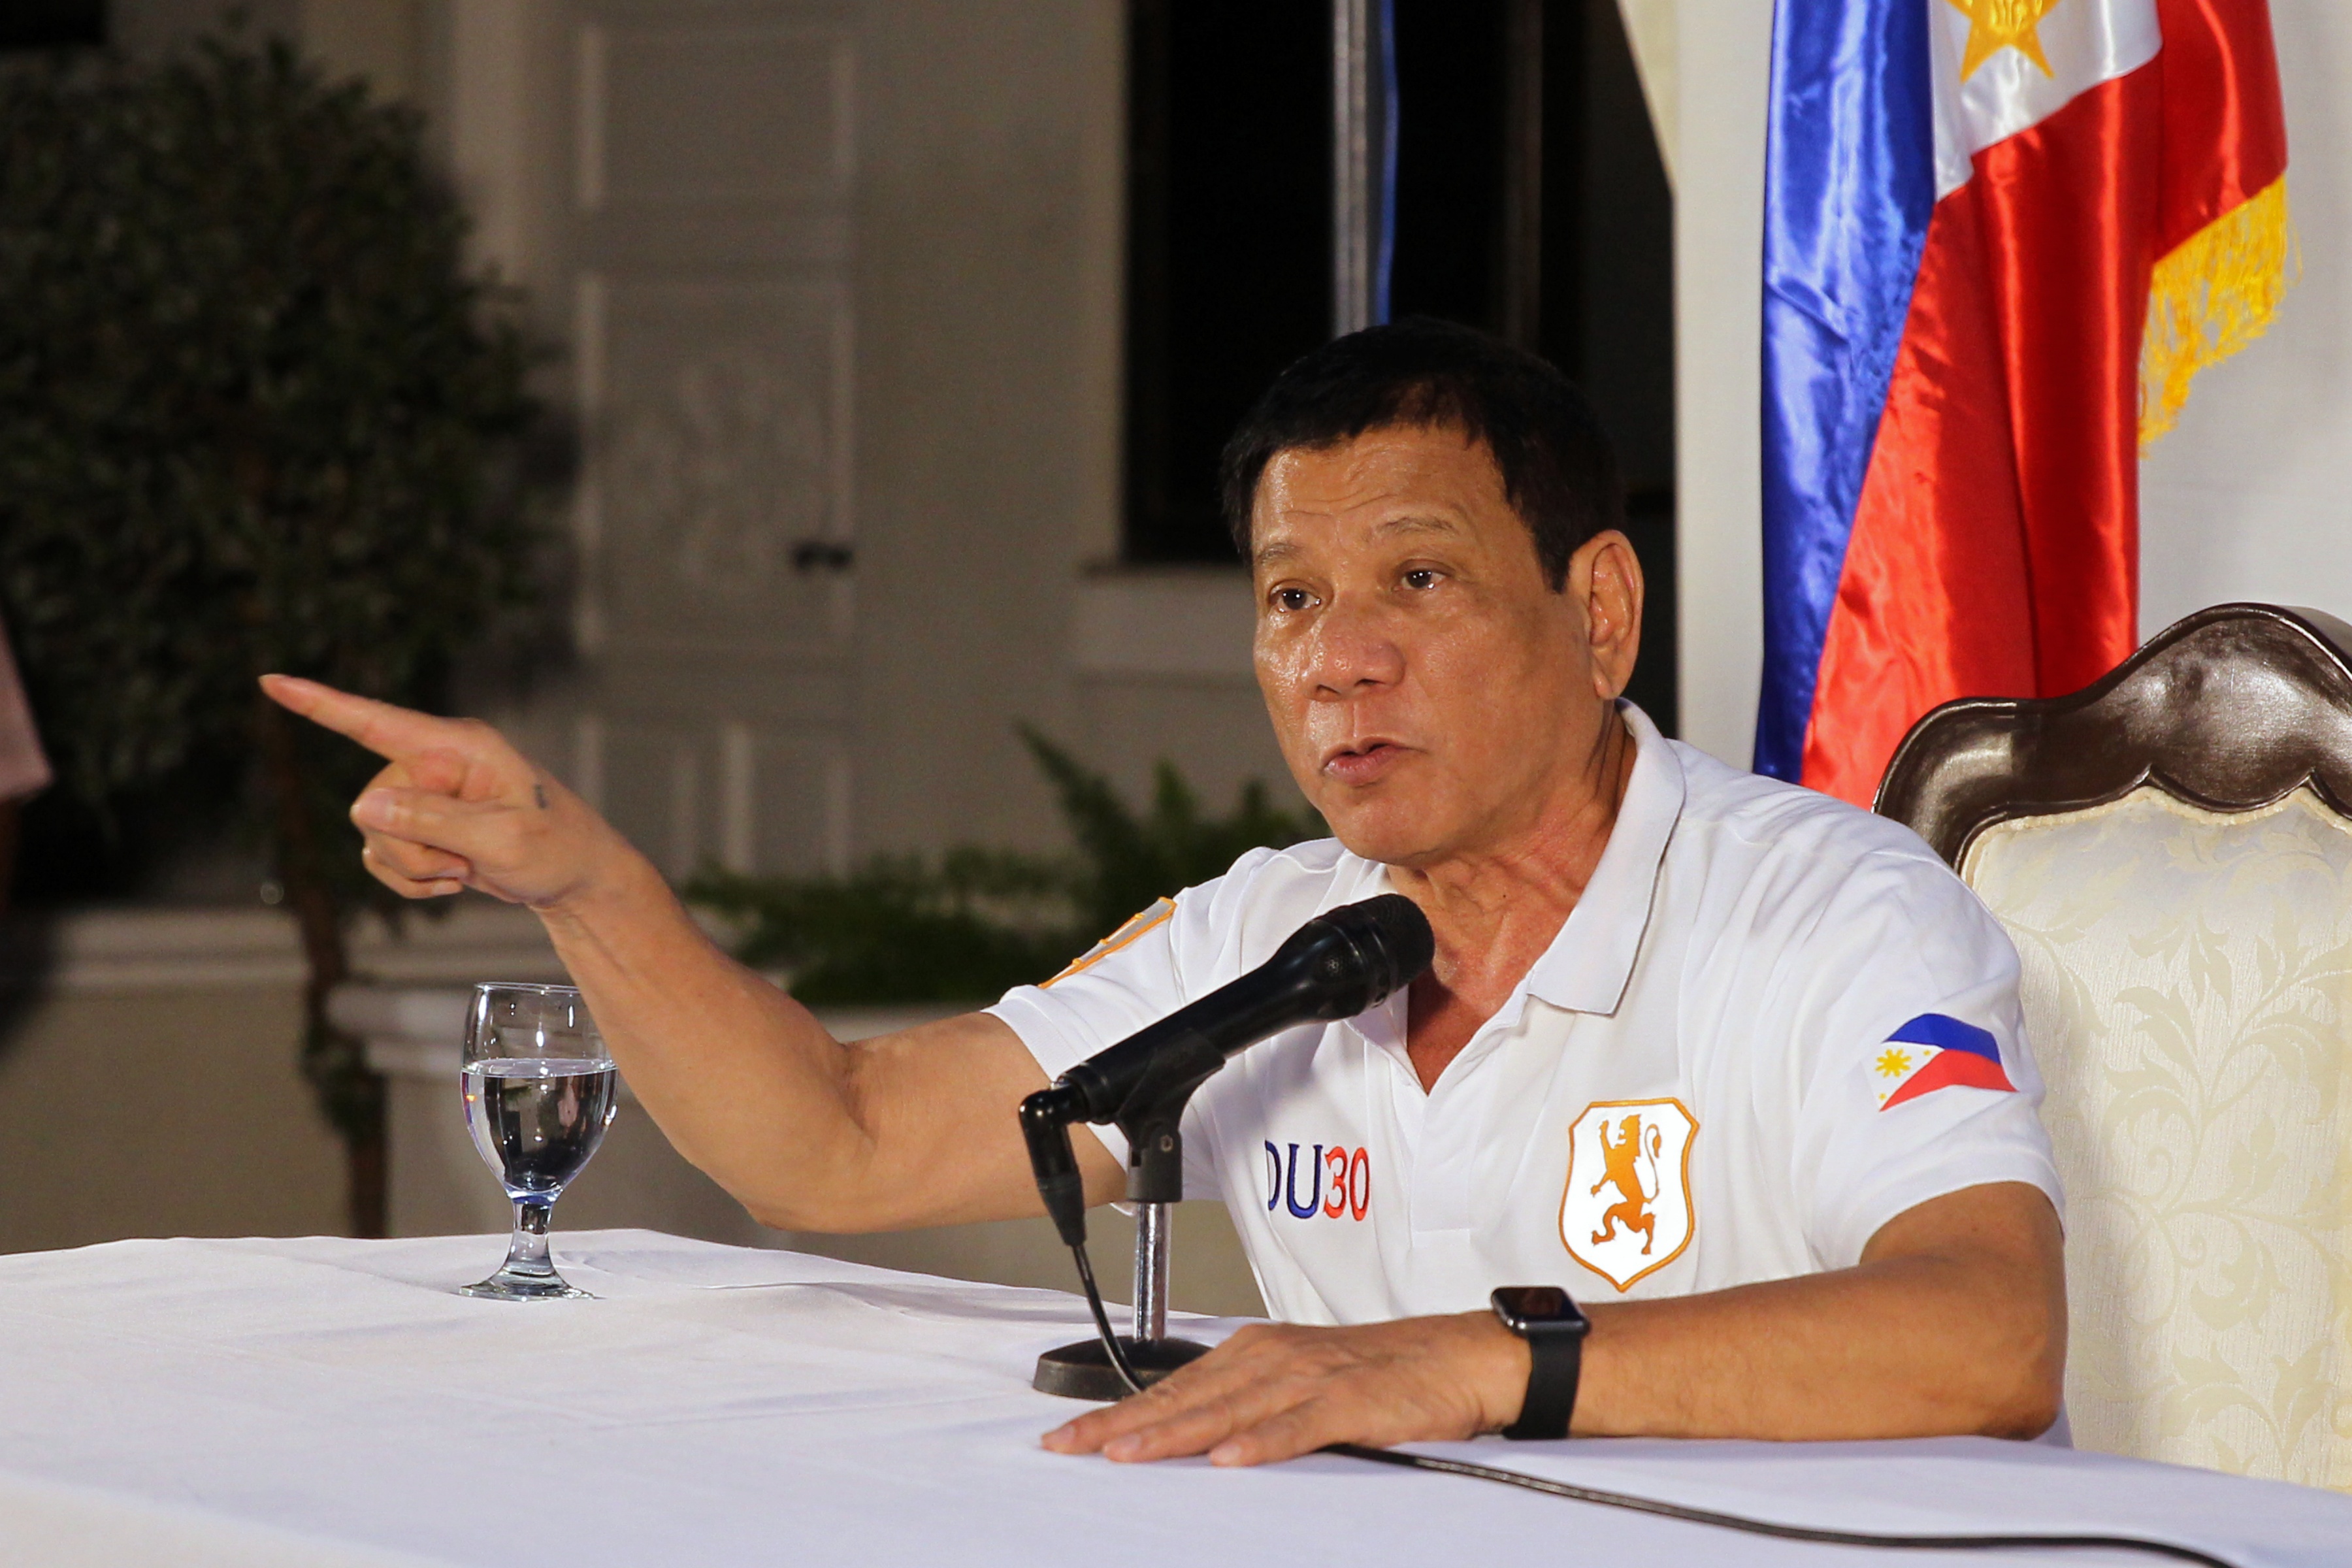 ANTI-CORRUPTION CAMPAIGN. President Rodrigo Duterte says he wants presidential appointees out of their posts during a press conference in Davao City on August 21, 2016. Photo by Karl Norman Alonzo/PPD 